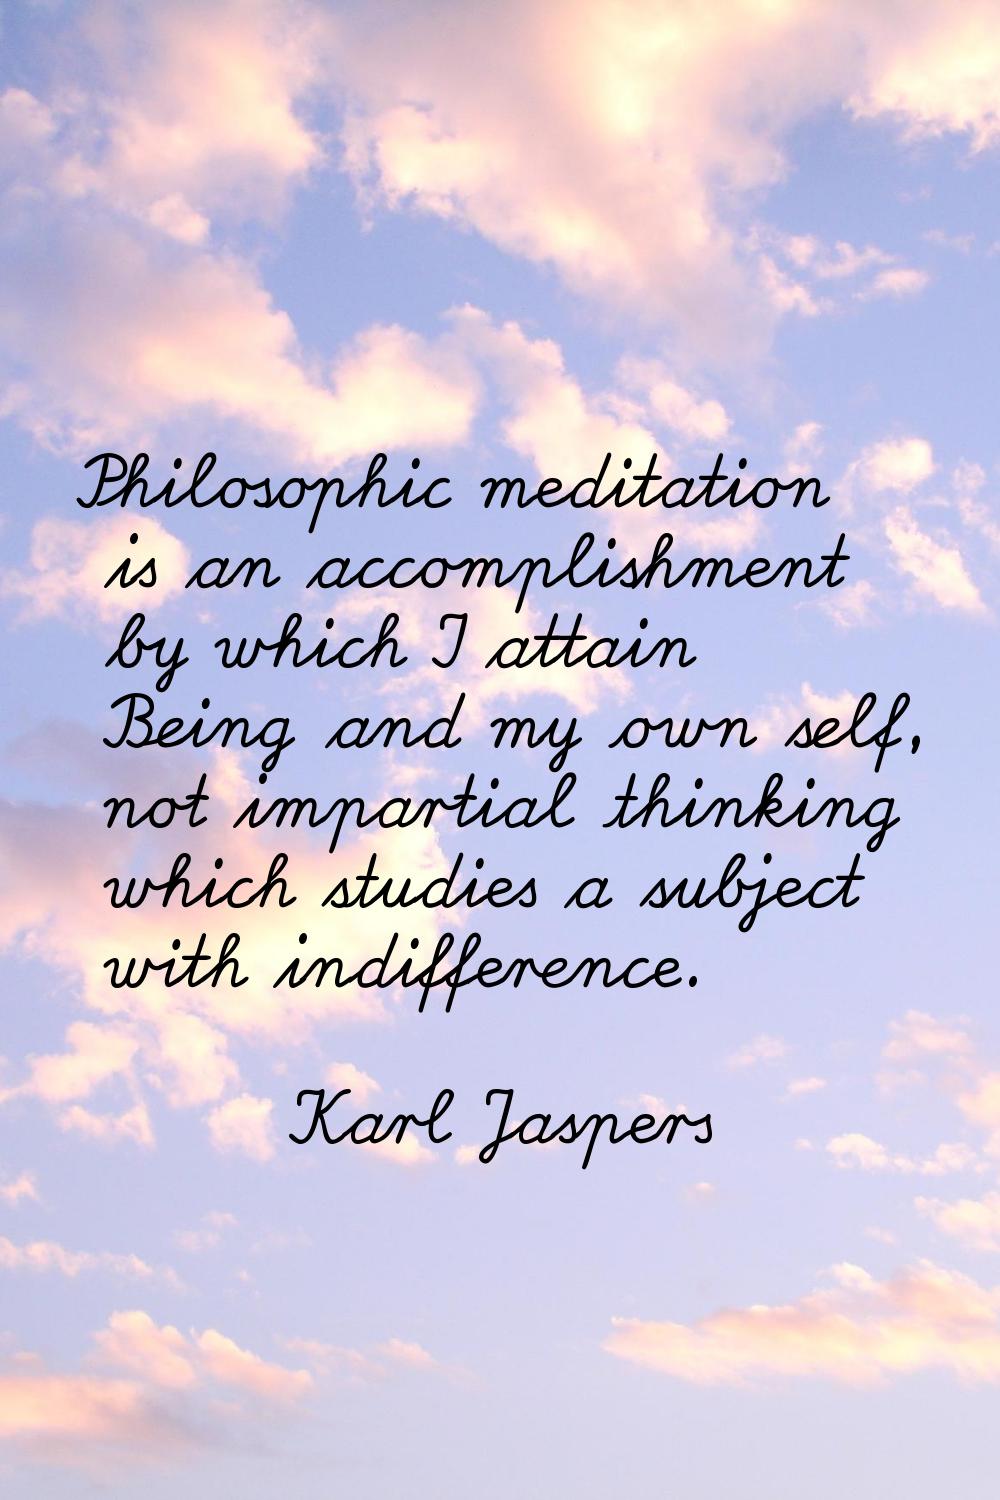 Philosophic meditation is an accomplishment by which I attain Being and my own self, not impartial 